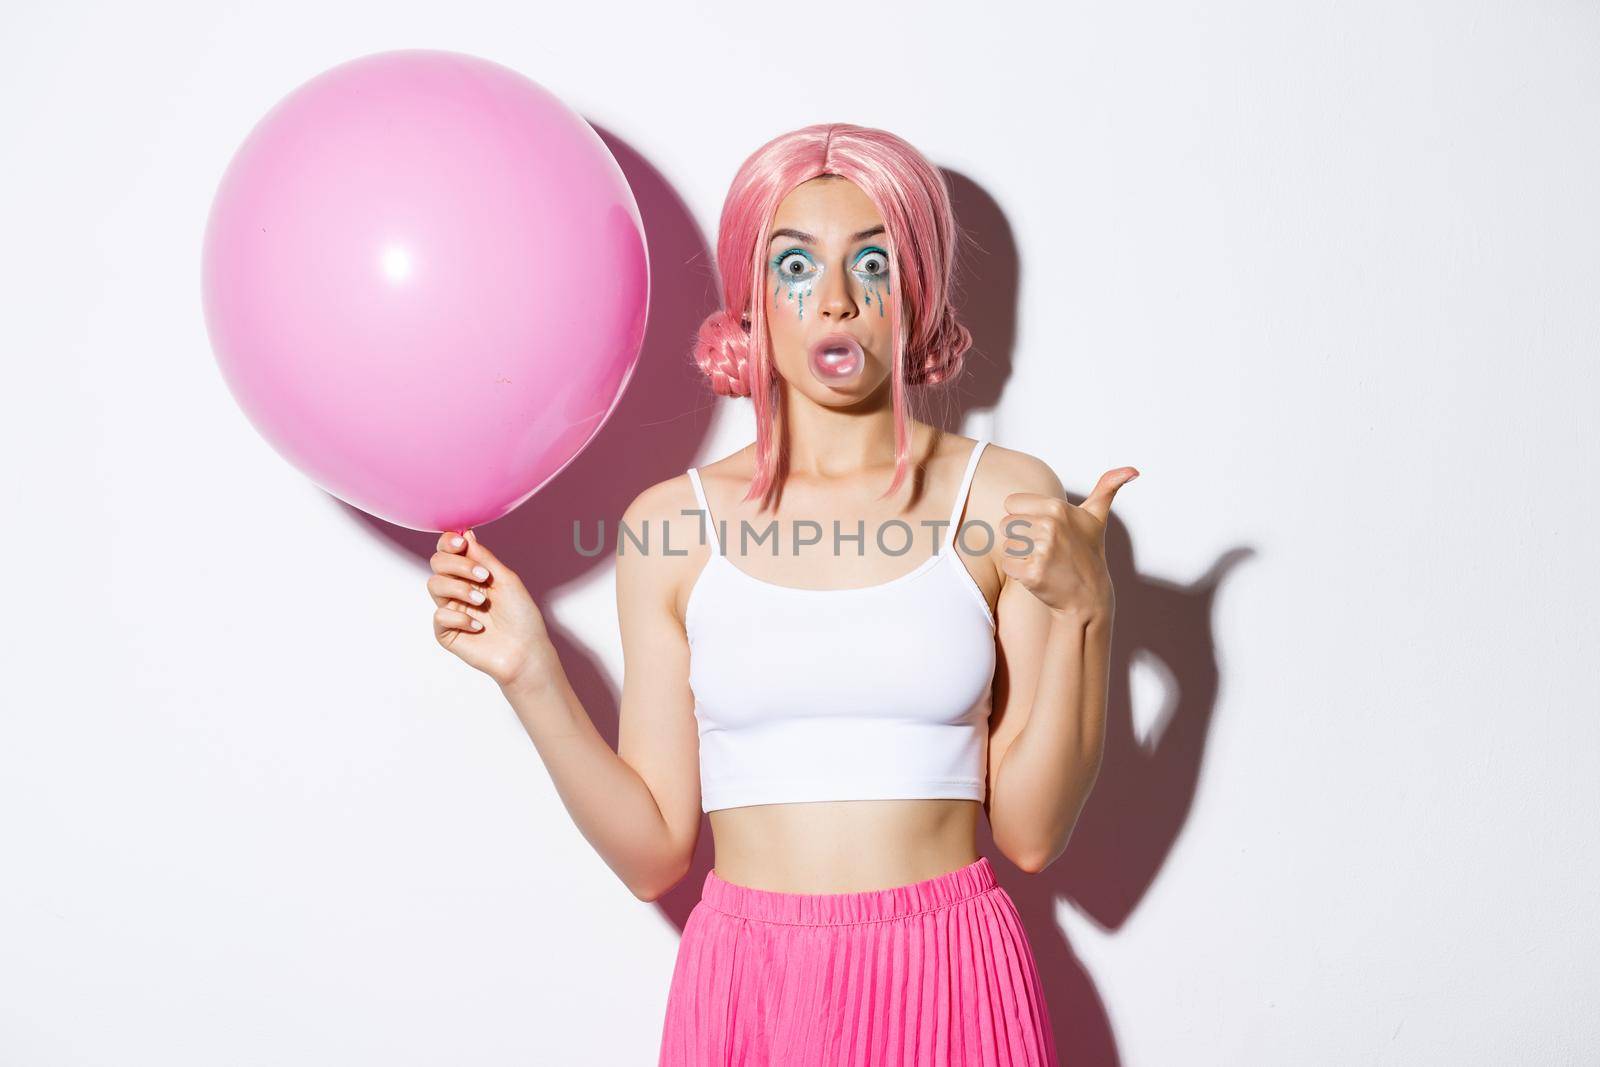 Image of excited attractive girl blowing bubble gum, showing thumbs-up in approval, standing with cute pink balloon while wearing party outfit and wig.